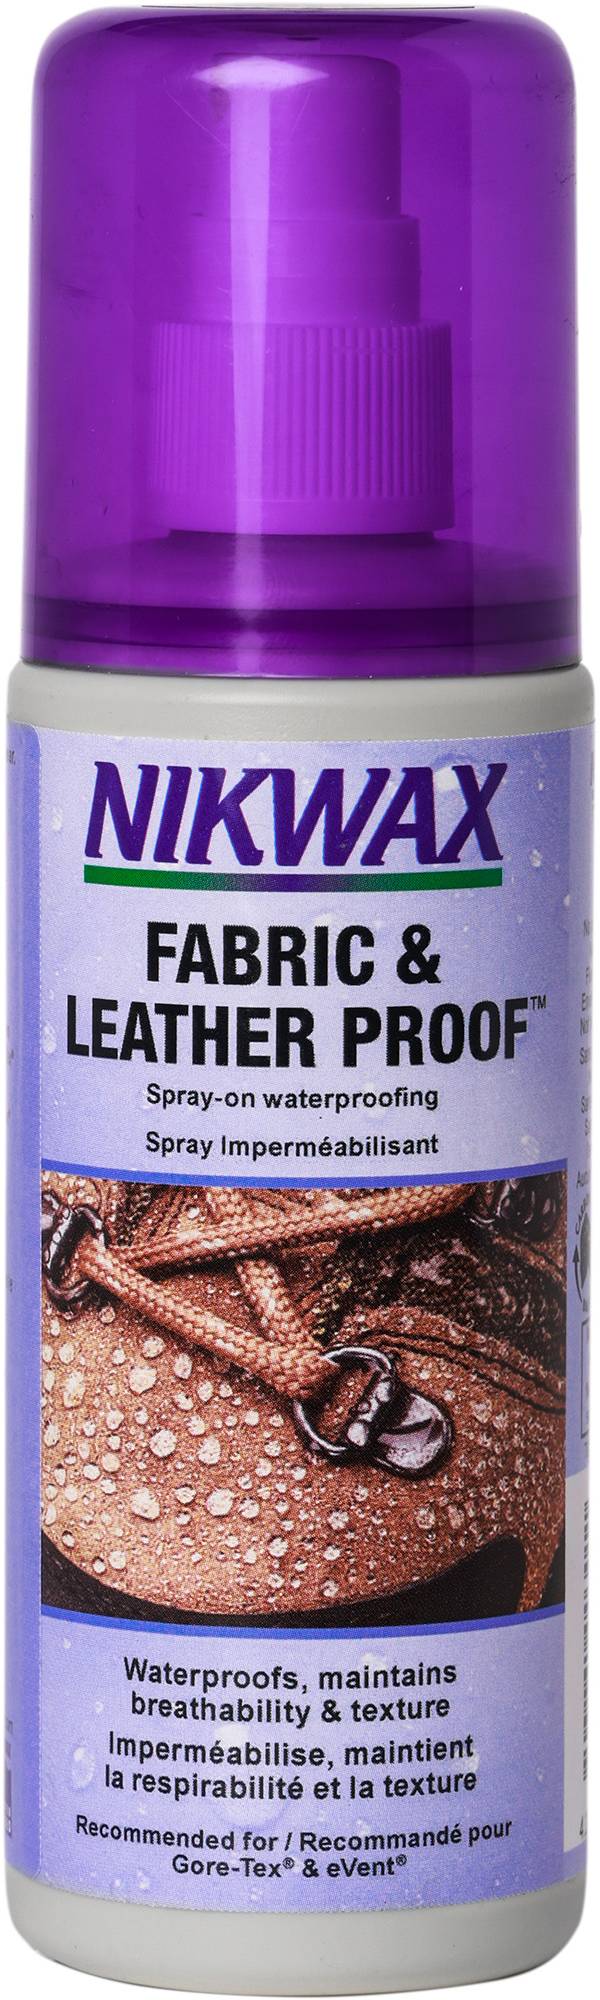 Nikwax Fabric & Leather Proof Spray-on Protector product image